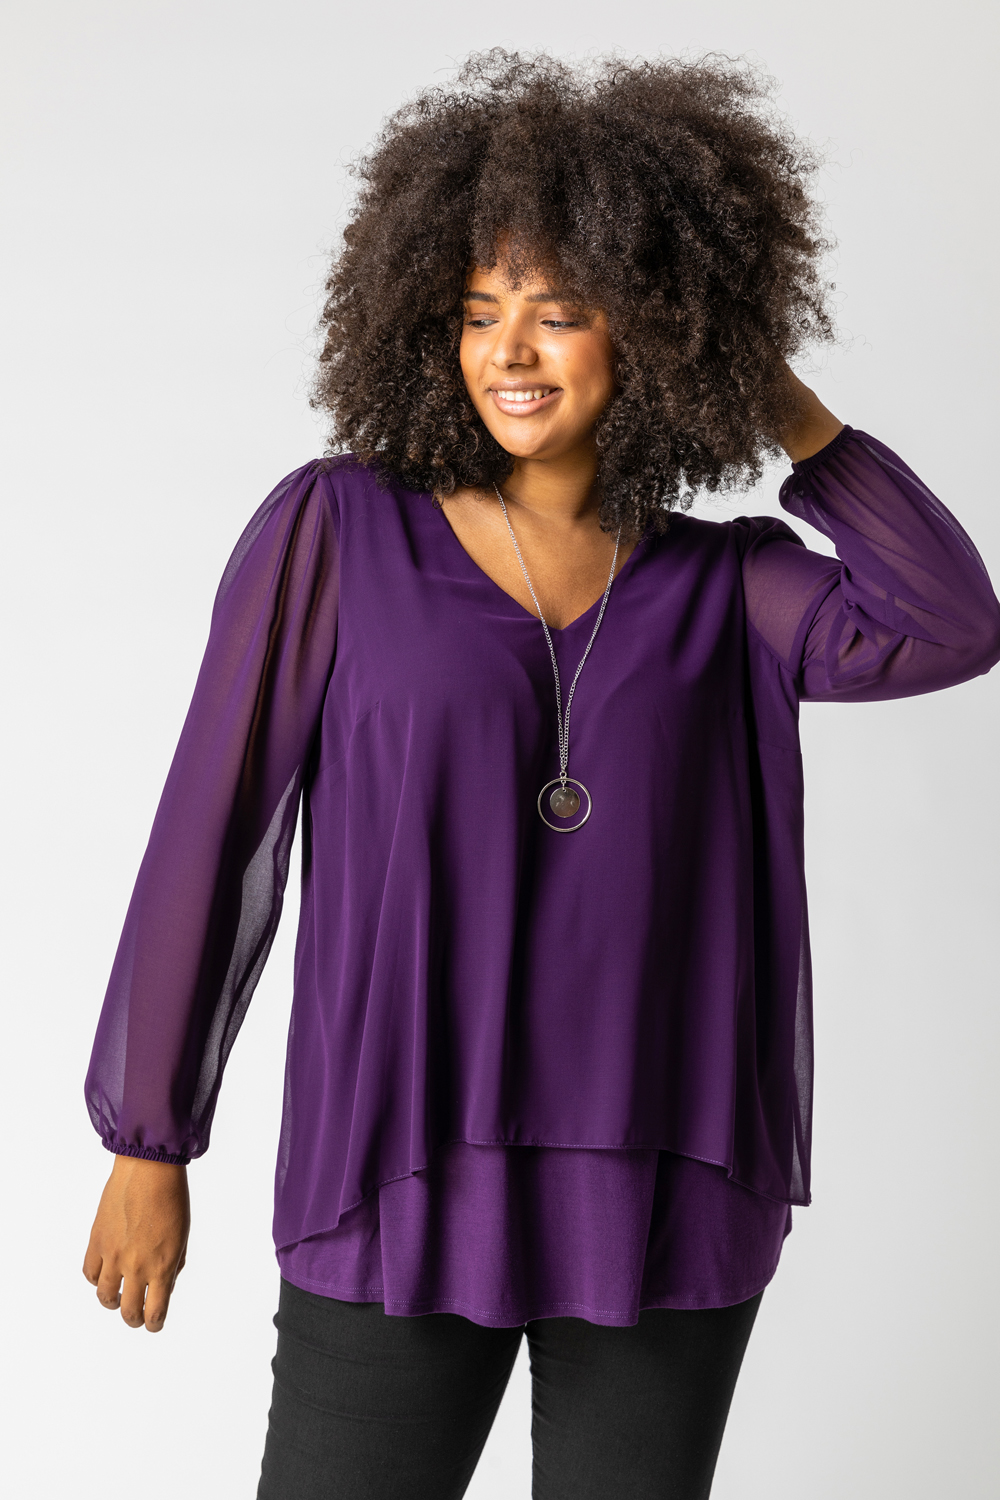 Roman Originals Curve Chiffon Top With Necklace in Plum